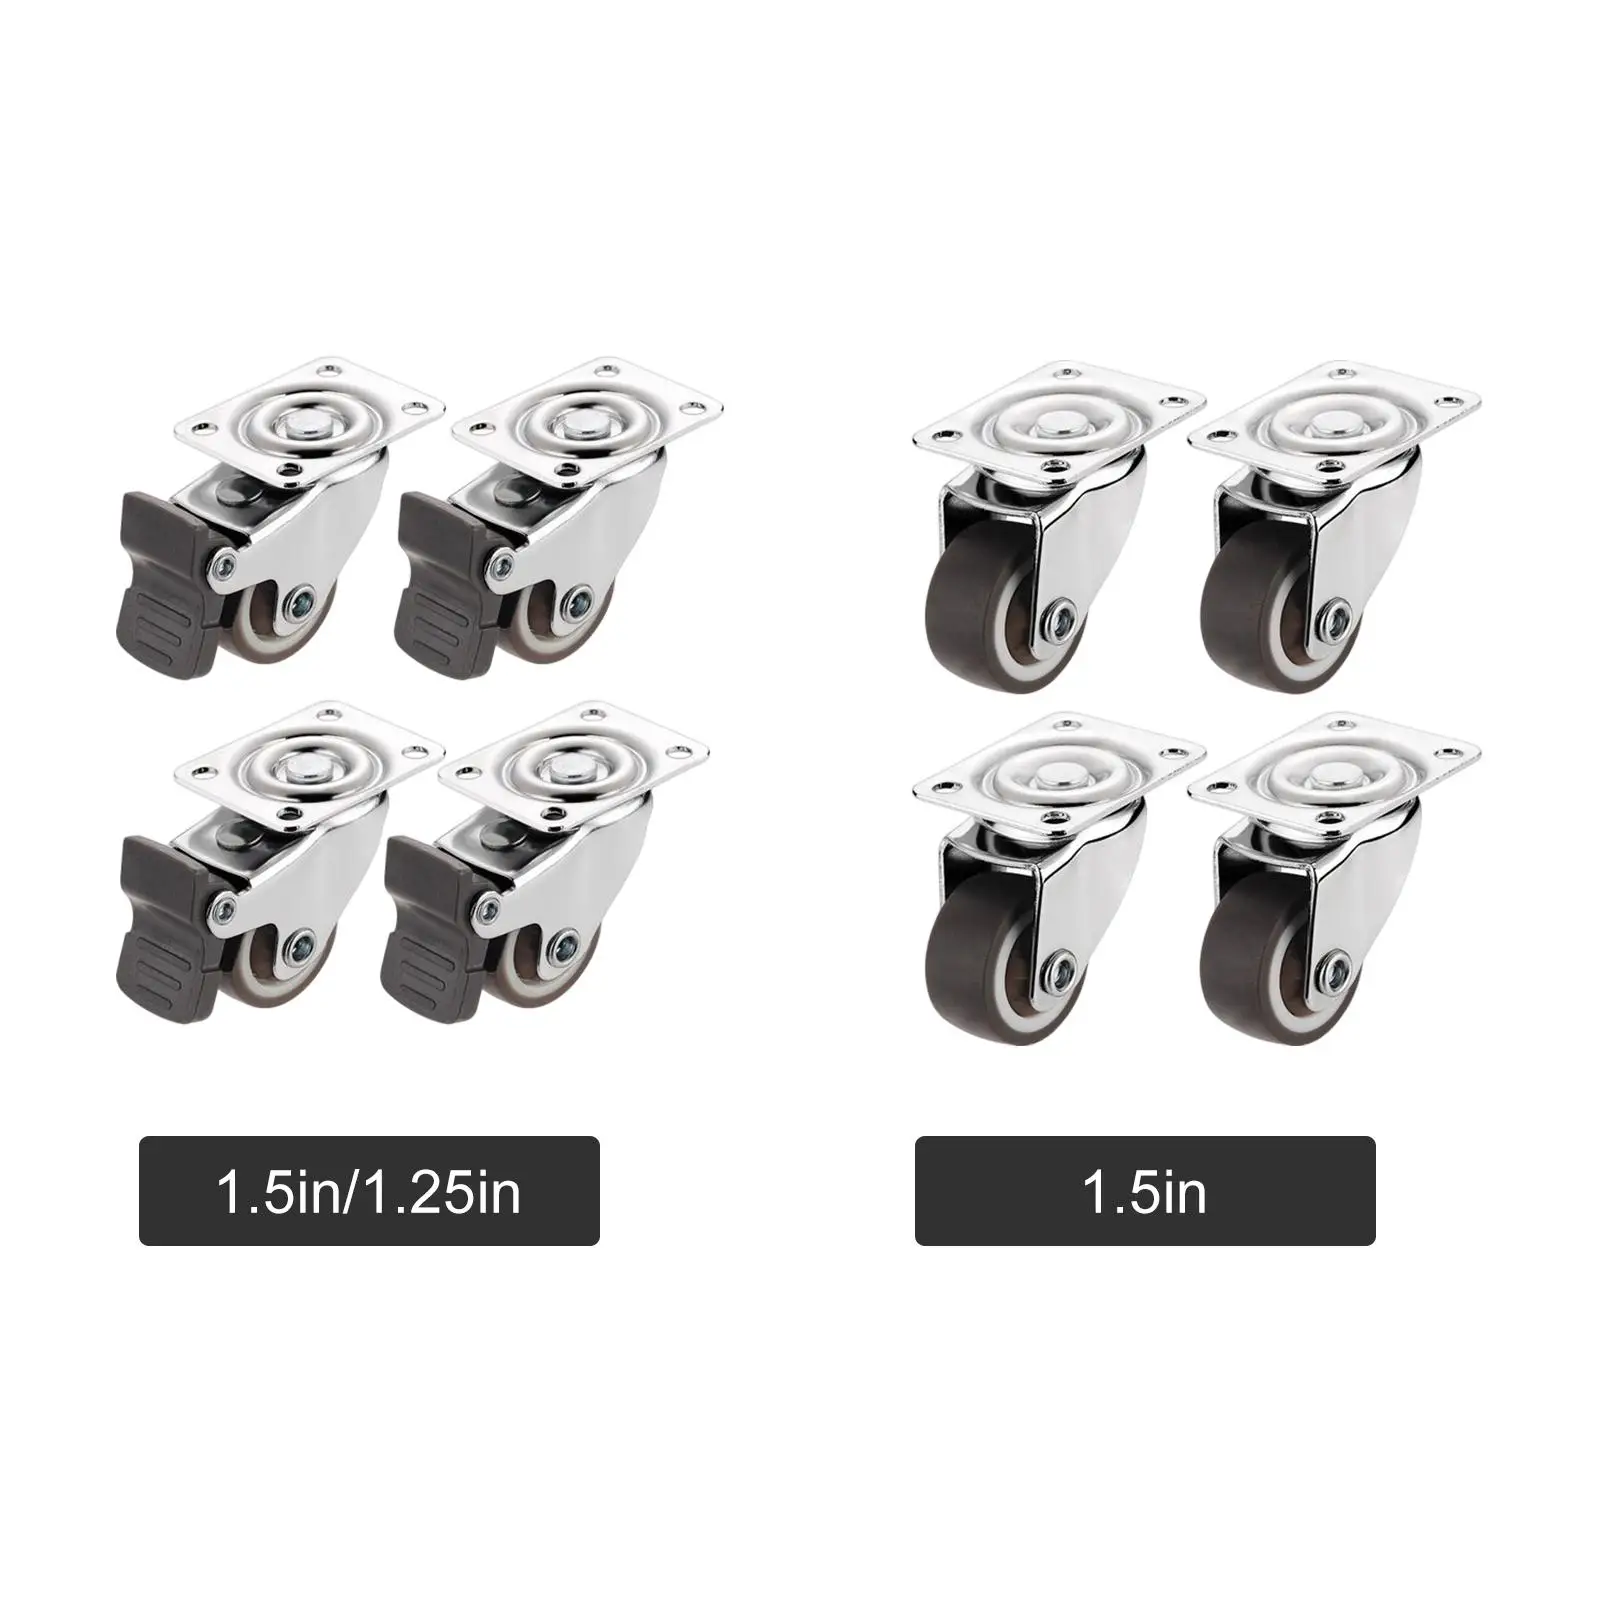 4 Pieces Swivel Caster Furniture Caster Universal Caster Wheel Roller Wheel for Cart Cabinet Chair Furniture Cupboard